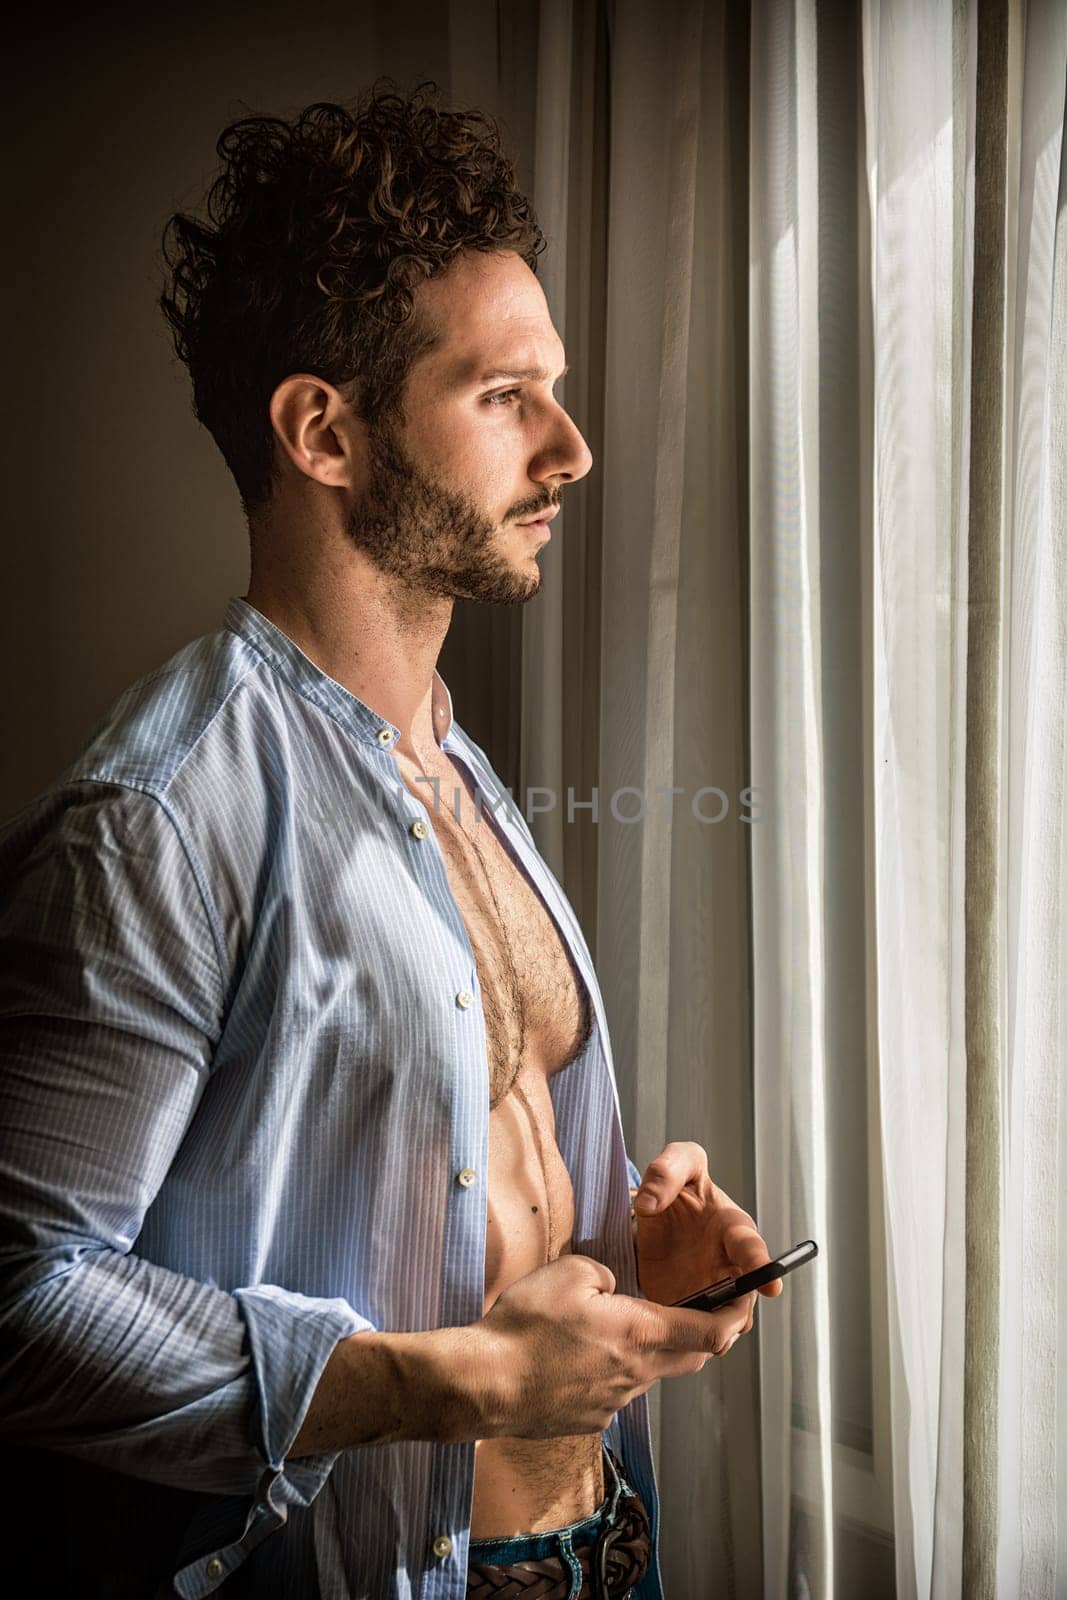 A Captivating View: A Muscular Man Captivated by His Cell Phone by artofphoto